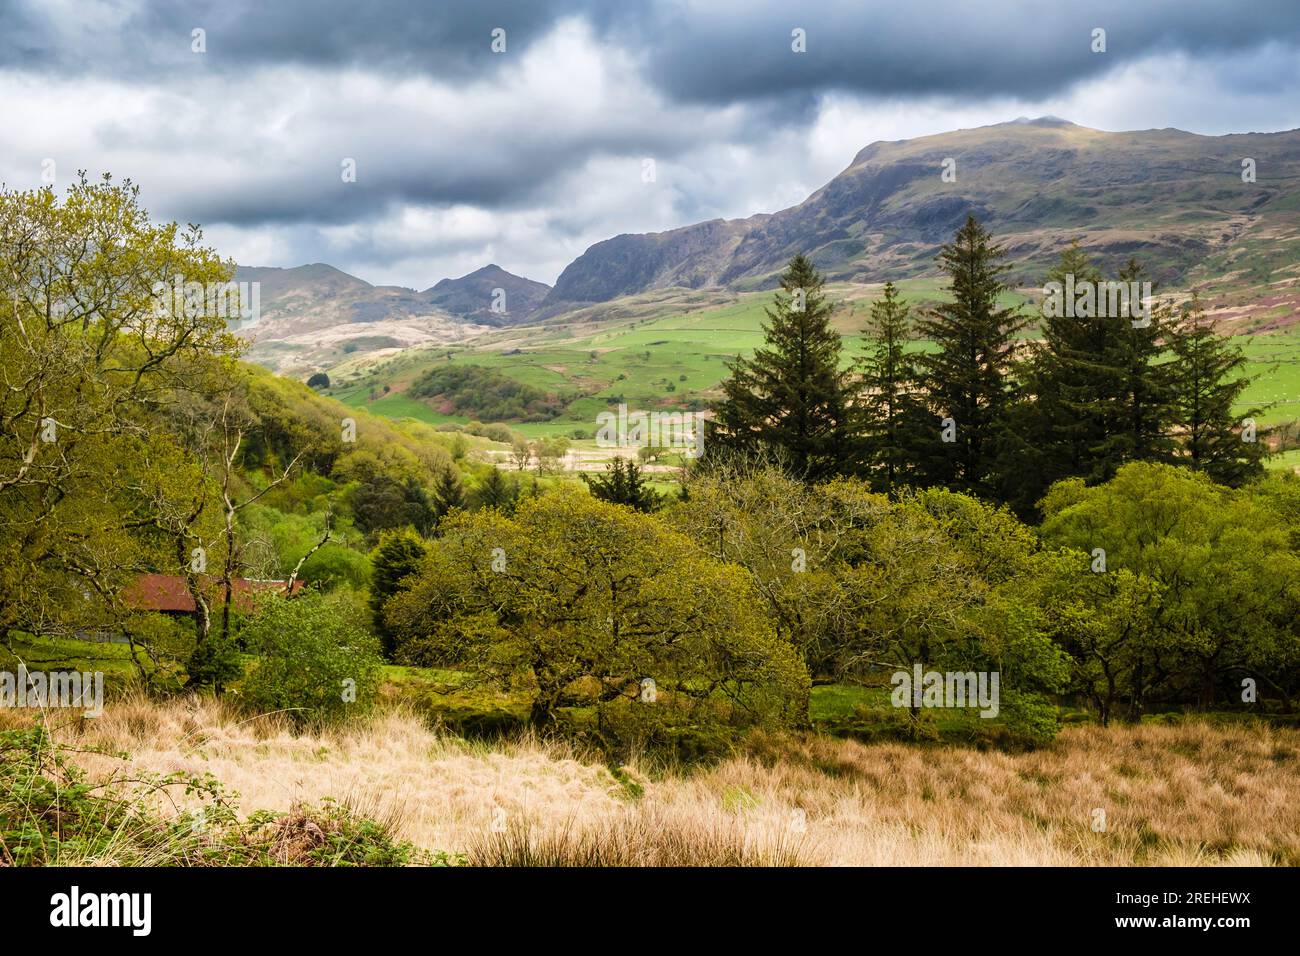 View up Cwm Pennant valley from wooded hillside in Gilfach nature reserve in Snowdonia National Park. Llanfihangel-y-pennant Porthmadog Gwynedd Wales Stock Photo